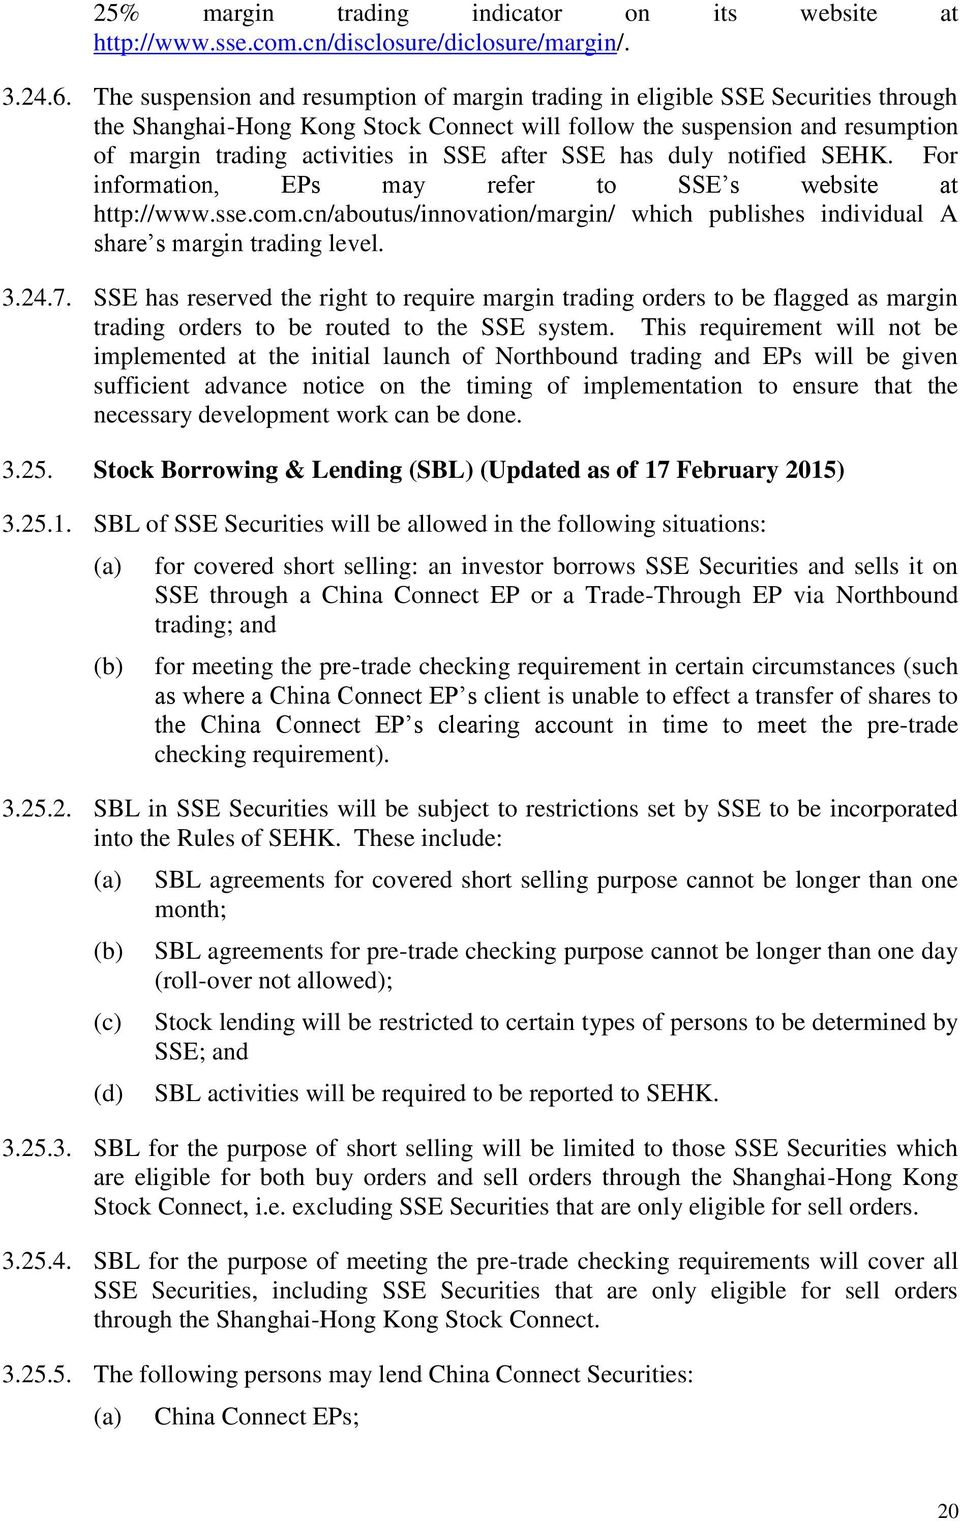 after SSE has duly notified SEHK. For information, EPs may refer to SSE s website at http://www.sse.com.cn/aboutus/innovation/margin/ which publishes individual A share s margin trading level. 3.24.7.